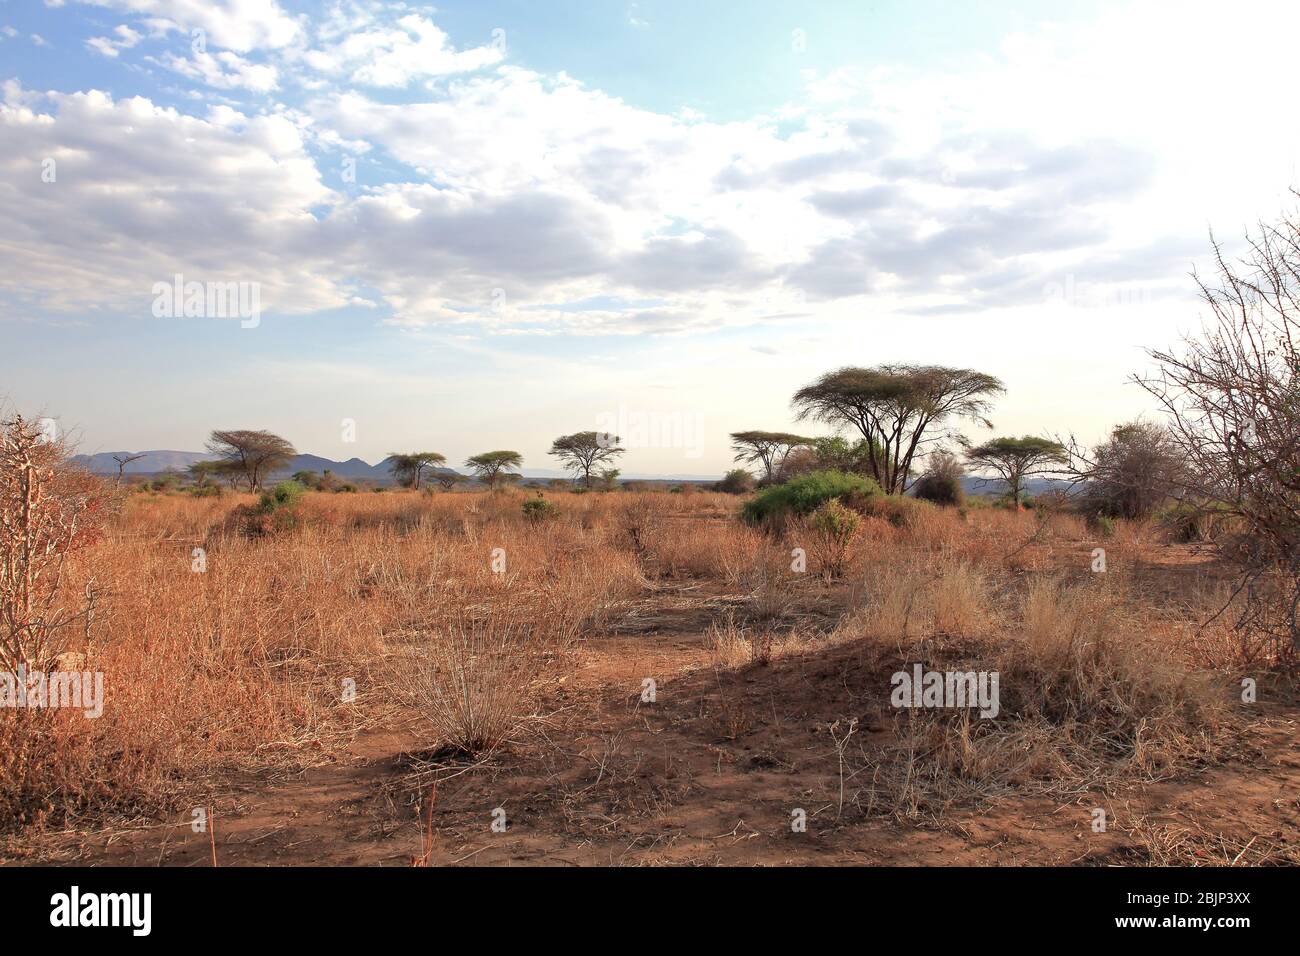 A view of the African bush Stock Photo